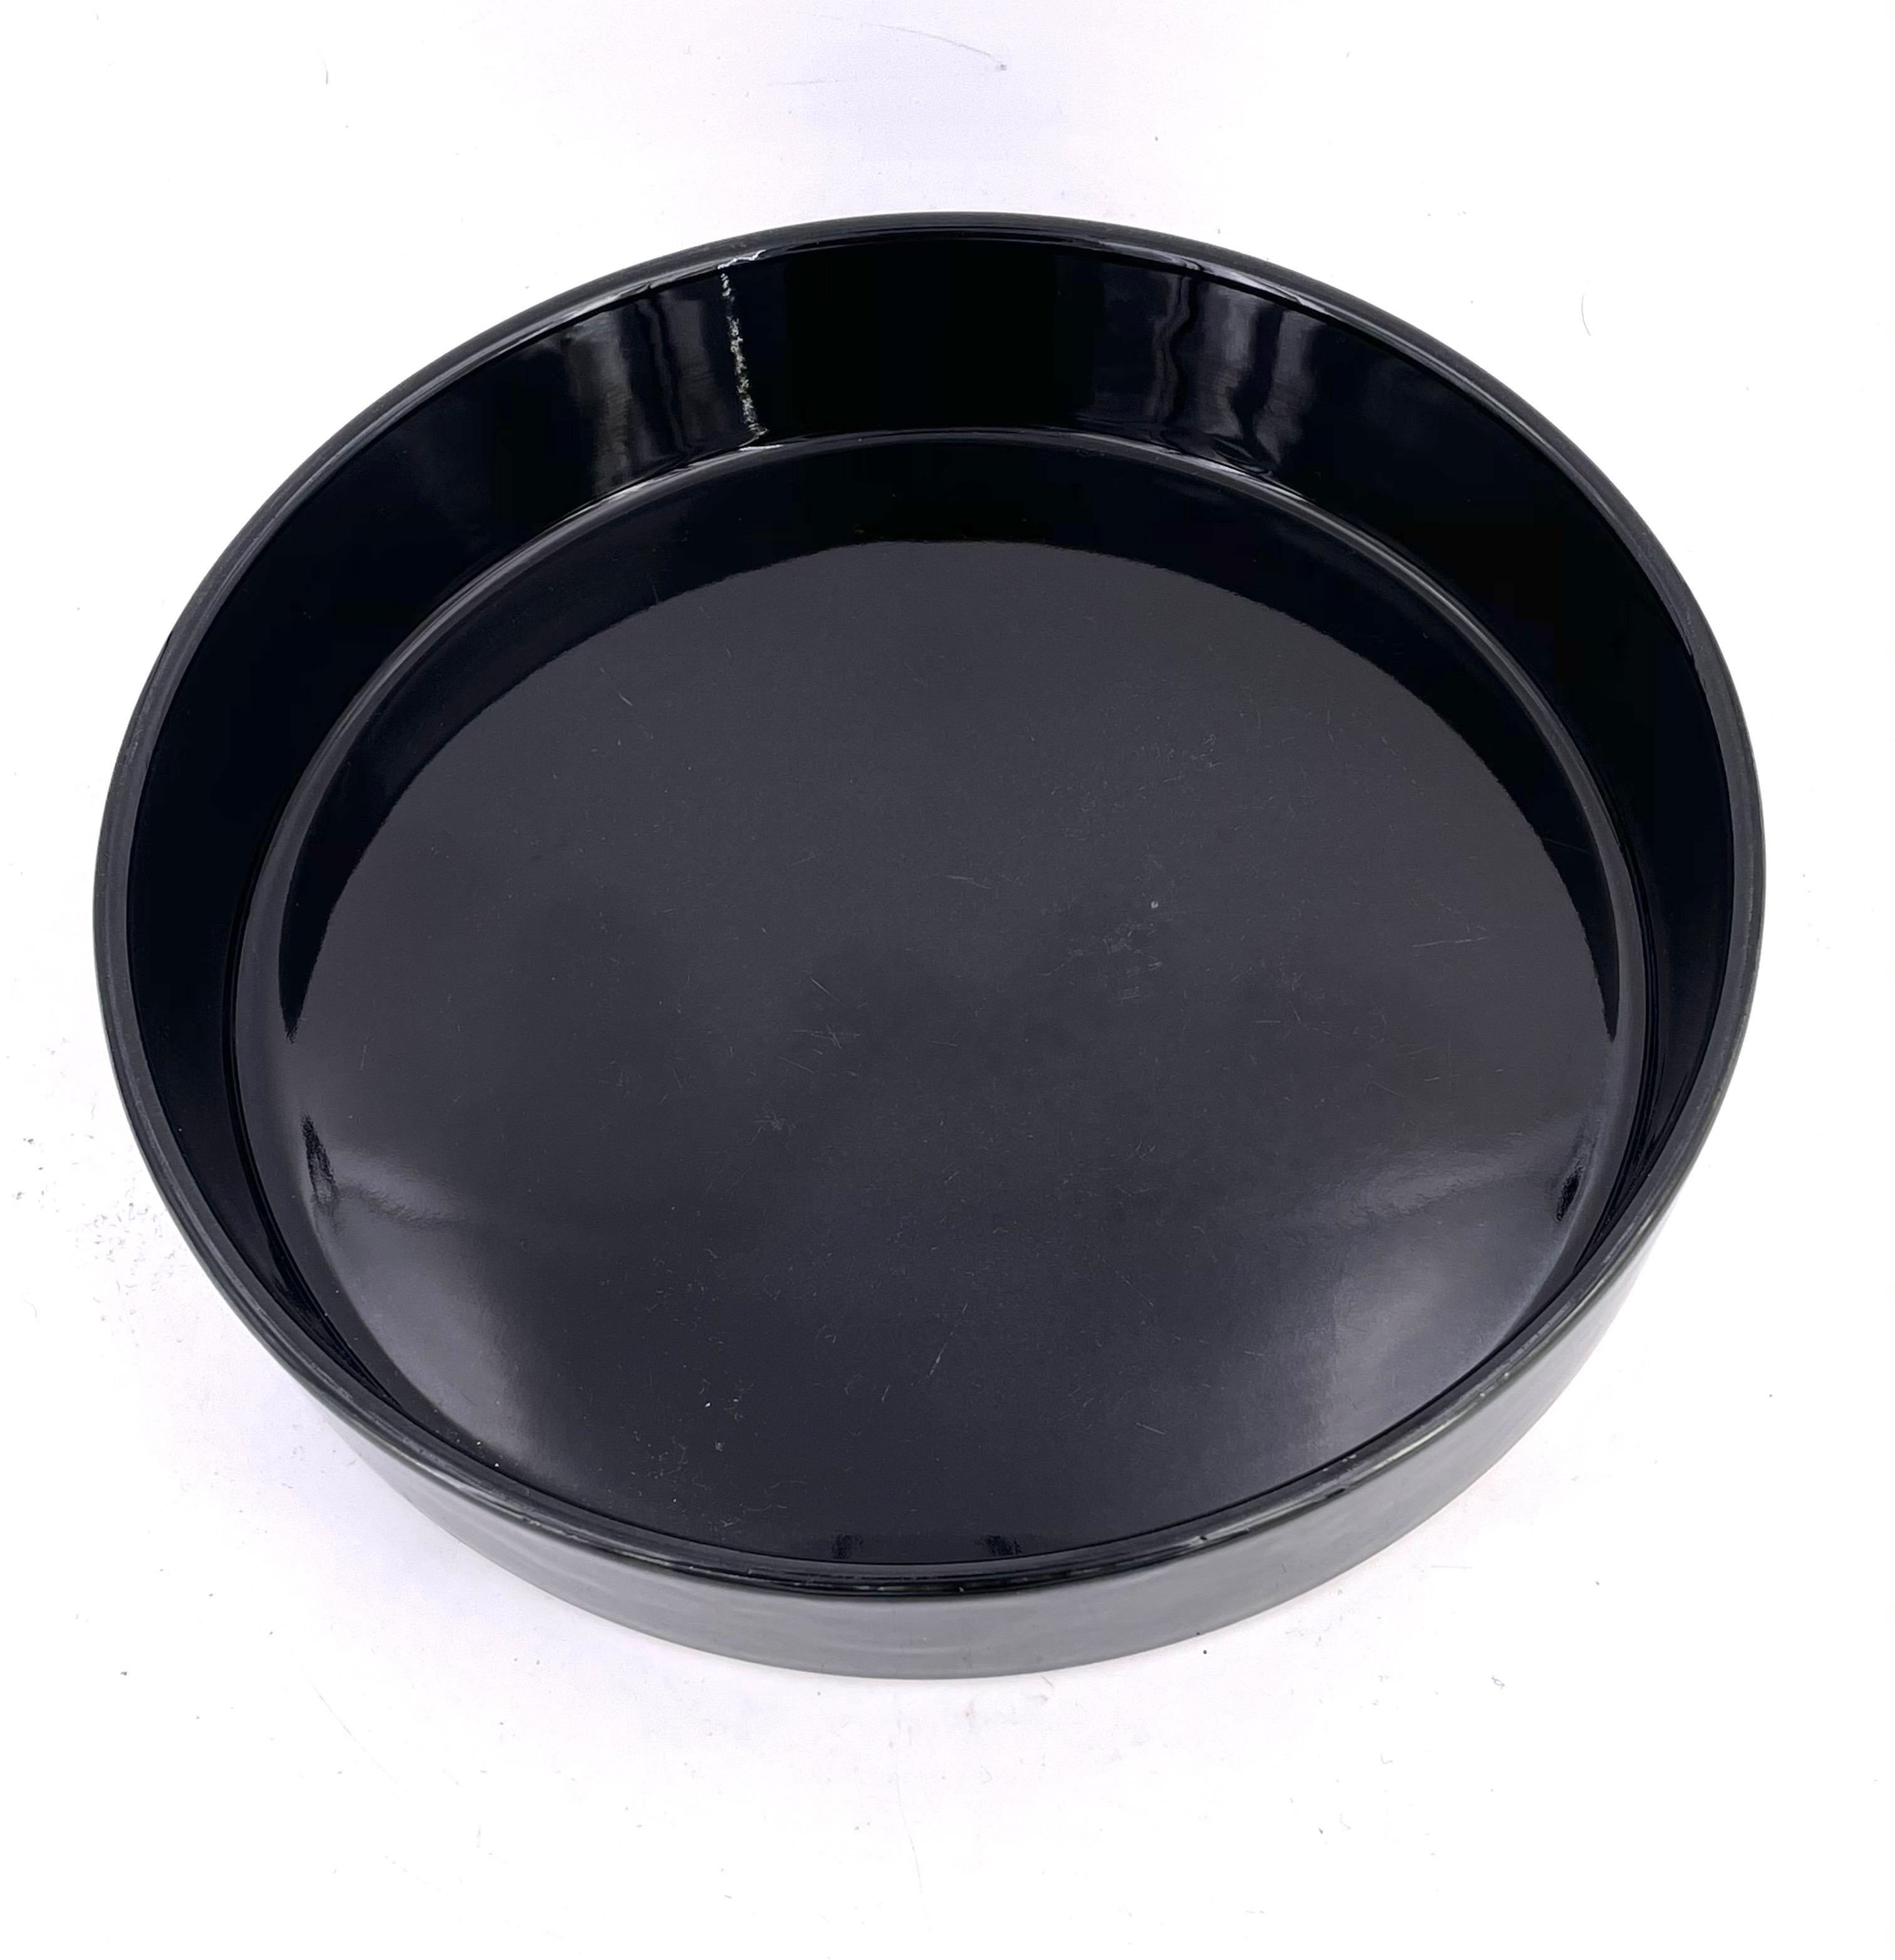 Beautiful circle in gloss black finish, great and simple design and shape on this ceramic Ikebana bowl or planter.